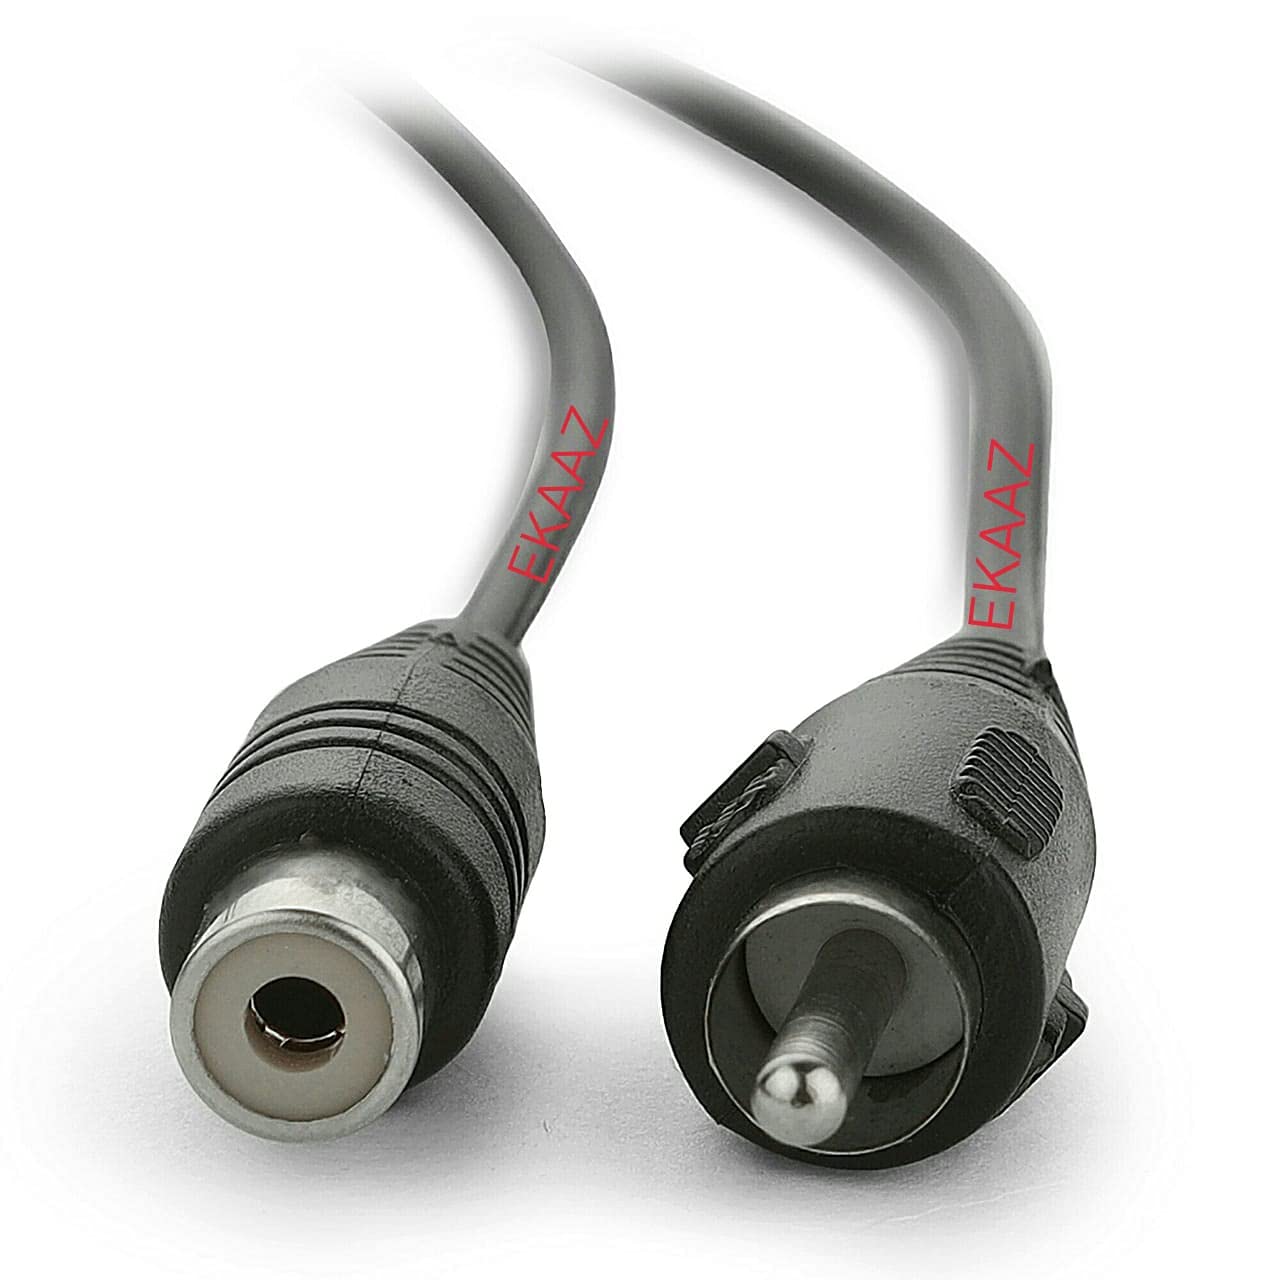  3.5mm to RCA AV Camera Video Cable, Audio Stereo Jack to 3 RCA Male  Splitter Extension Cables, Audio